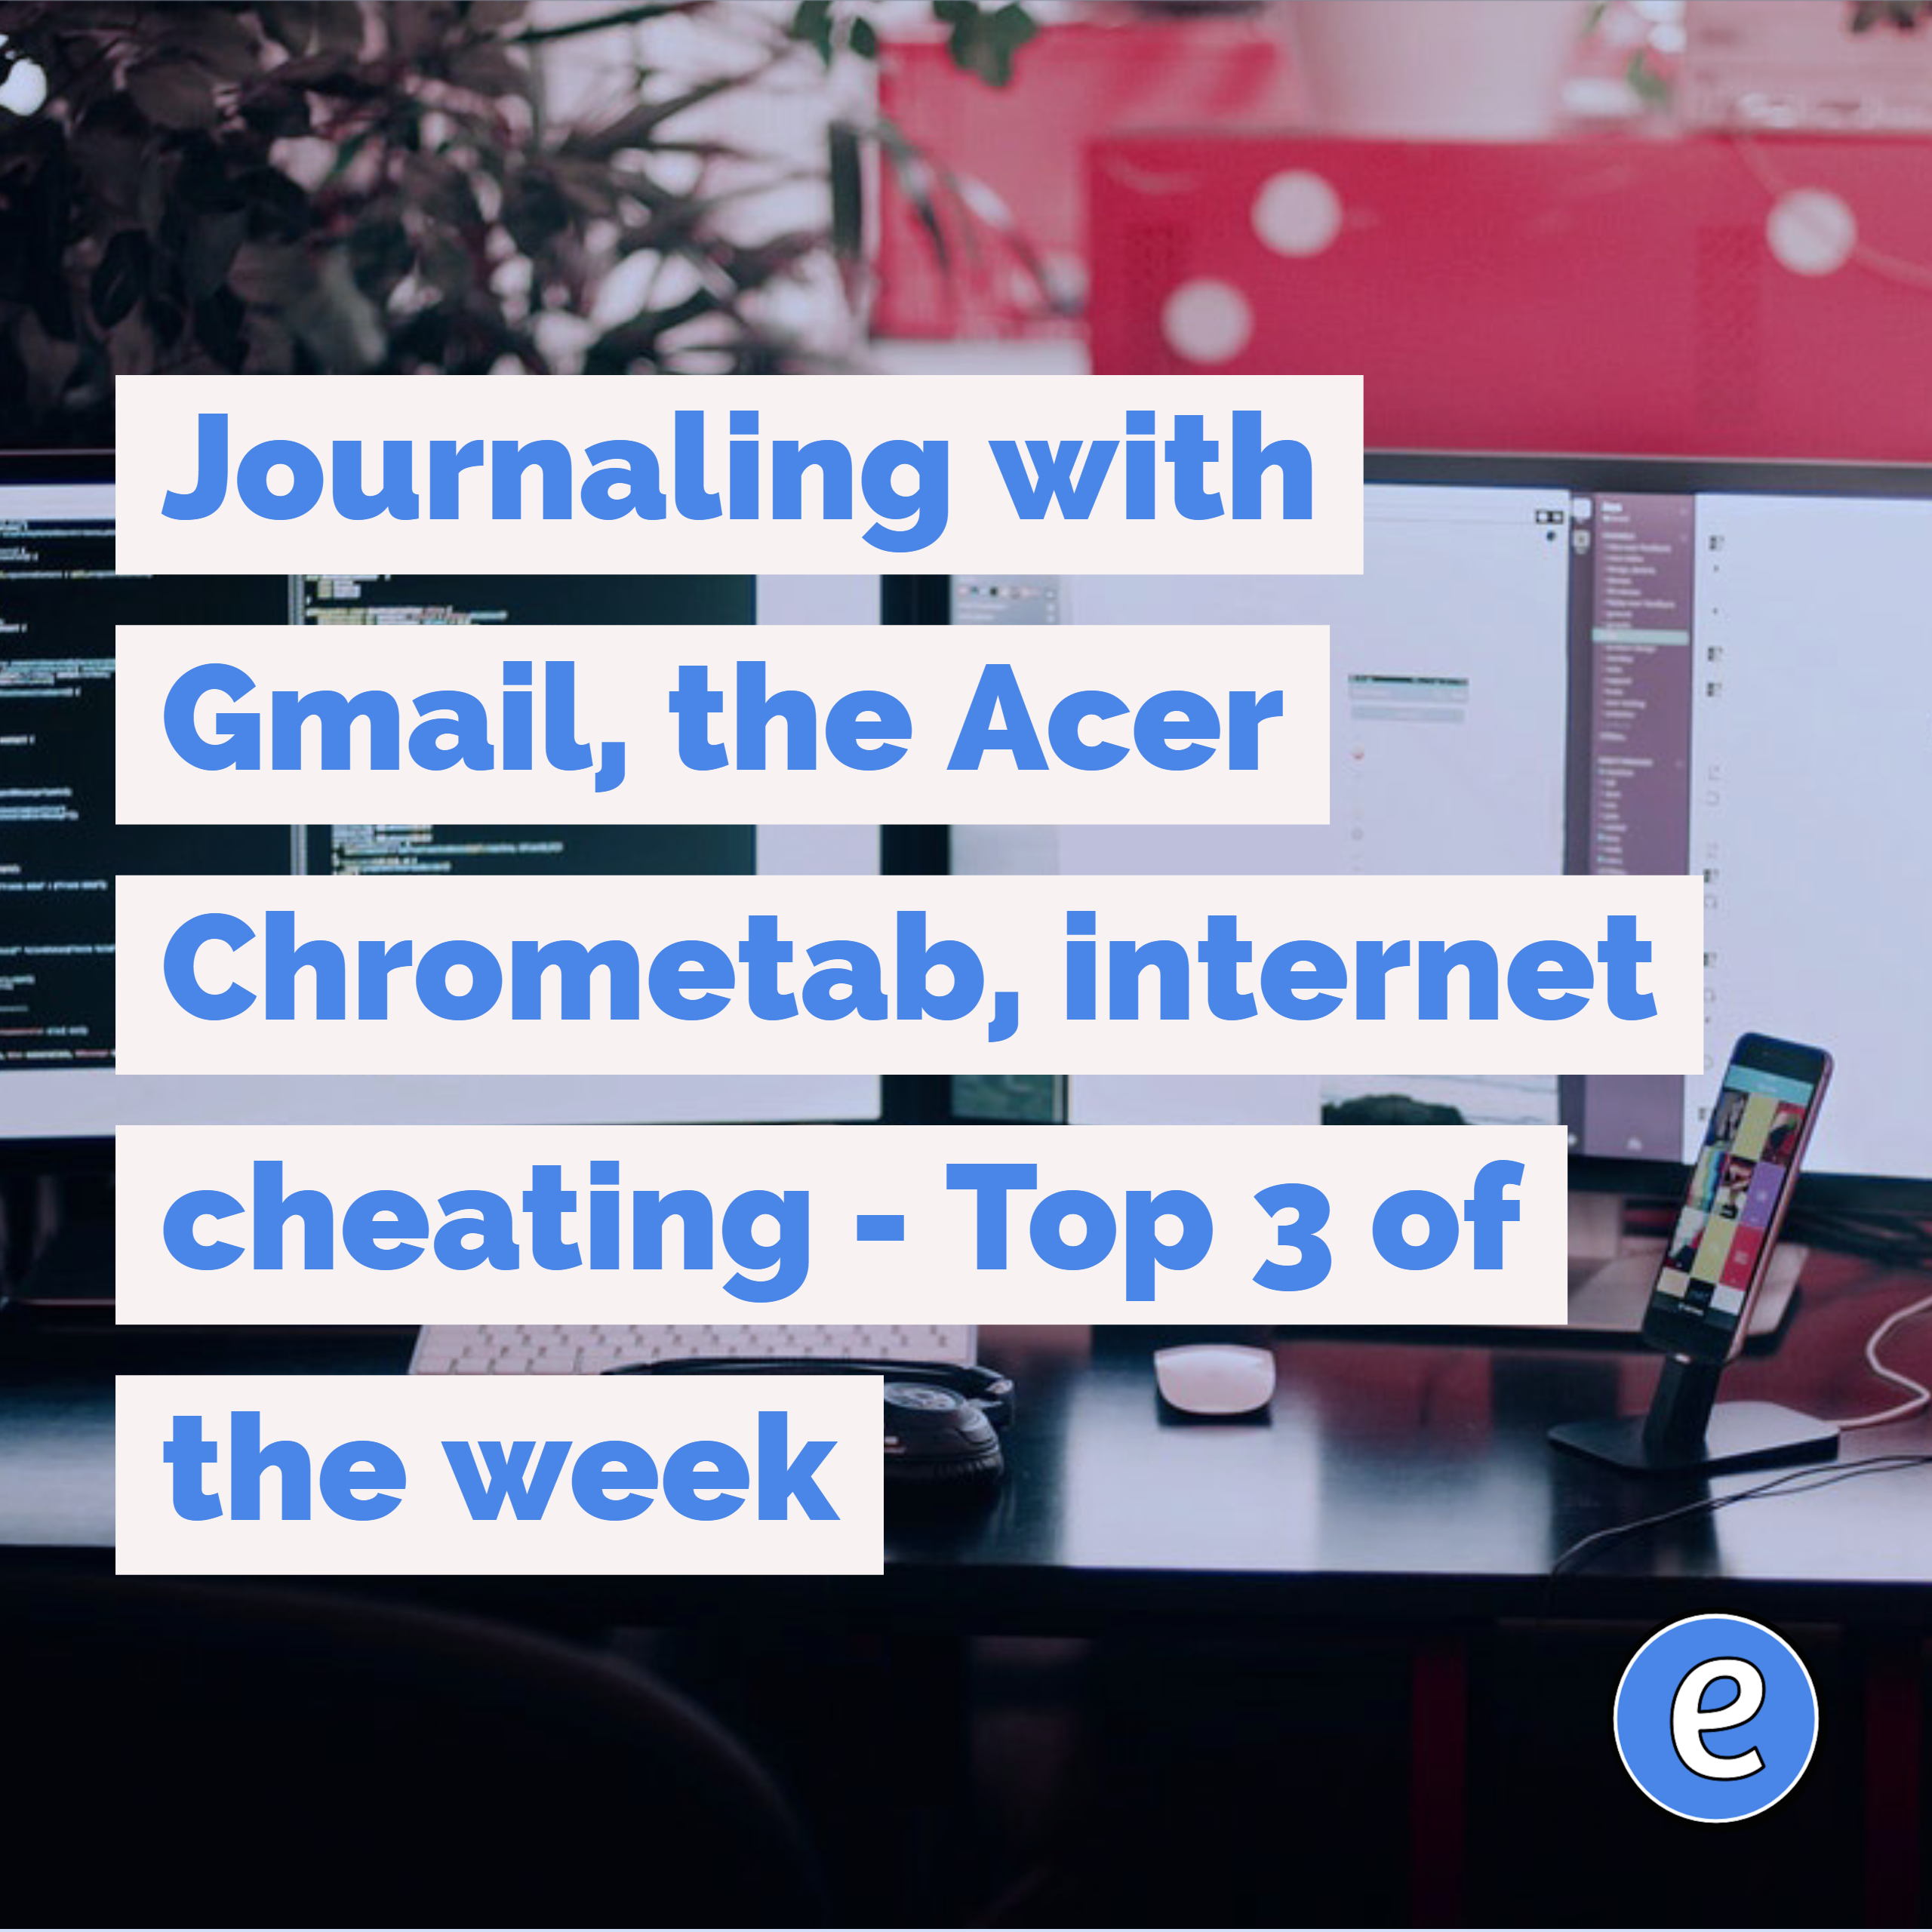 Journaling with Gmail, the Acer Chrometab, internet cheating – Top 3 of the week